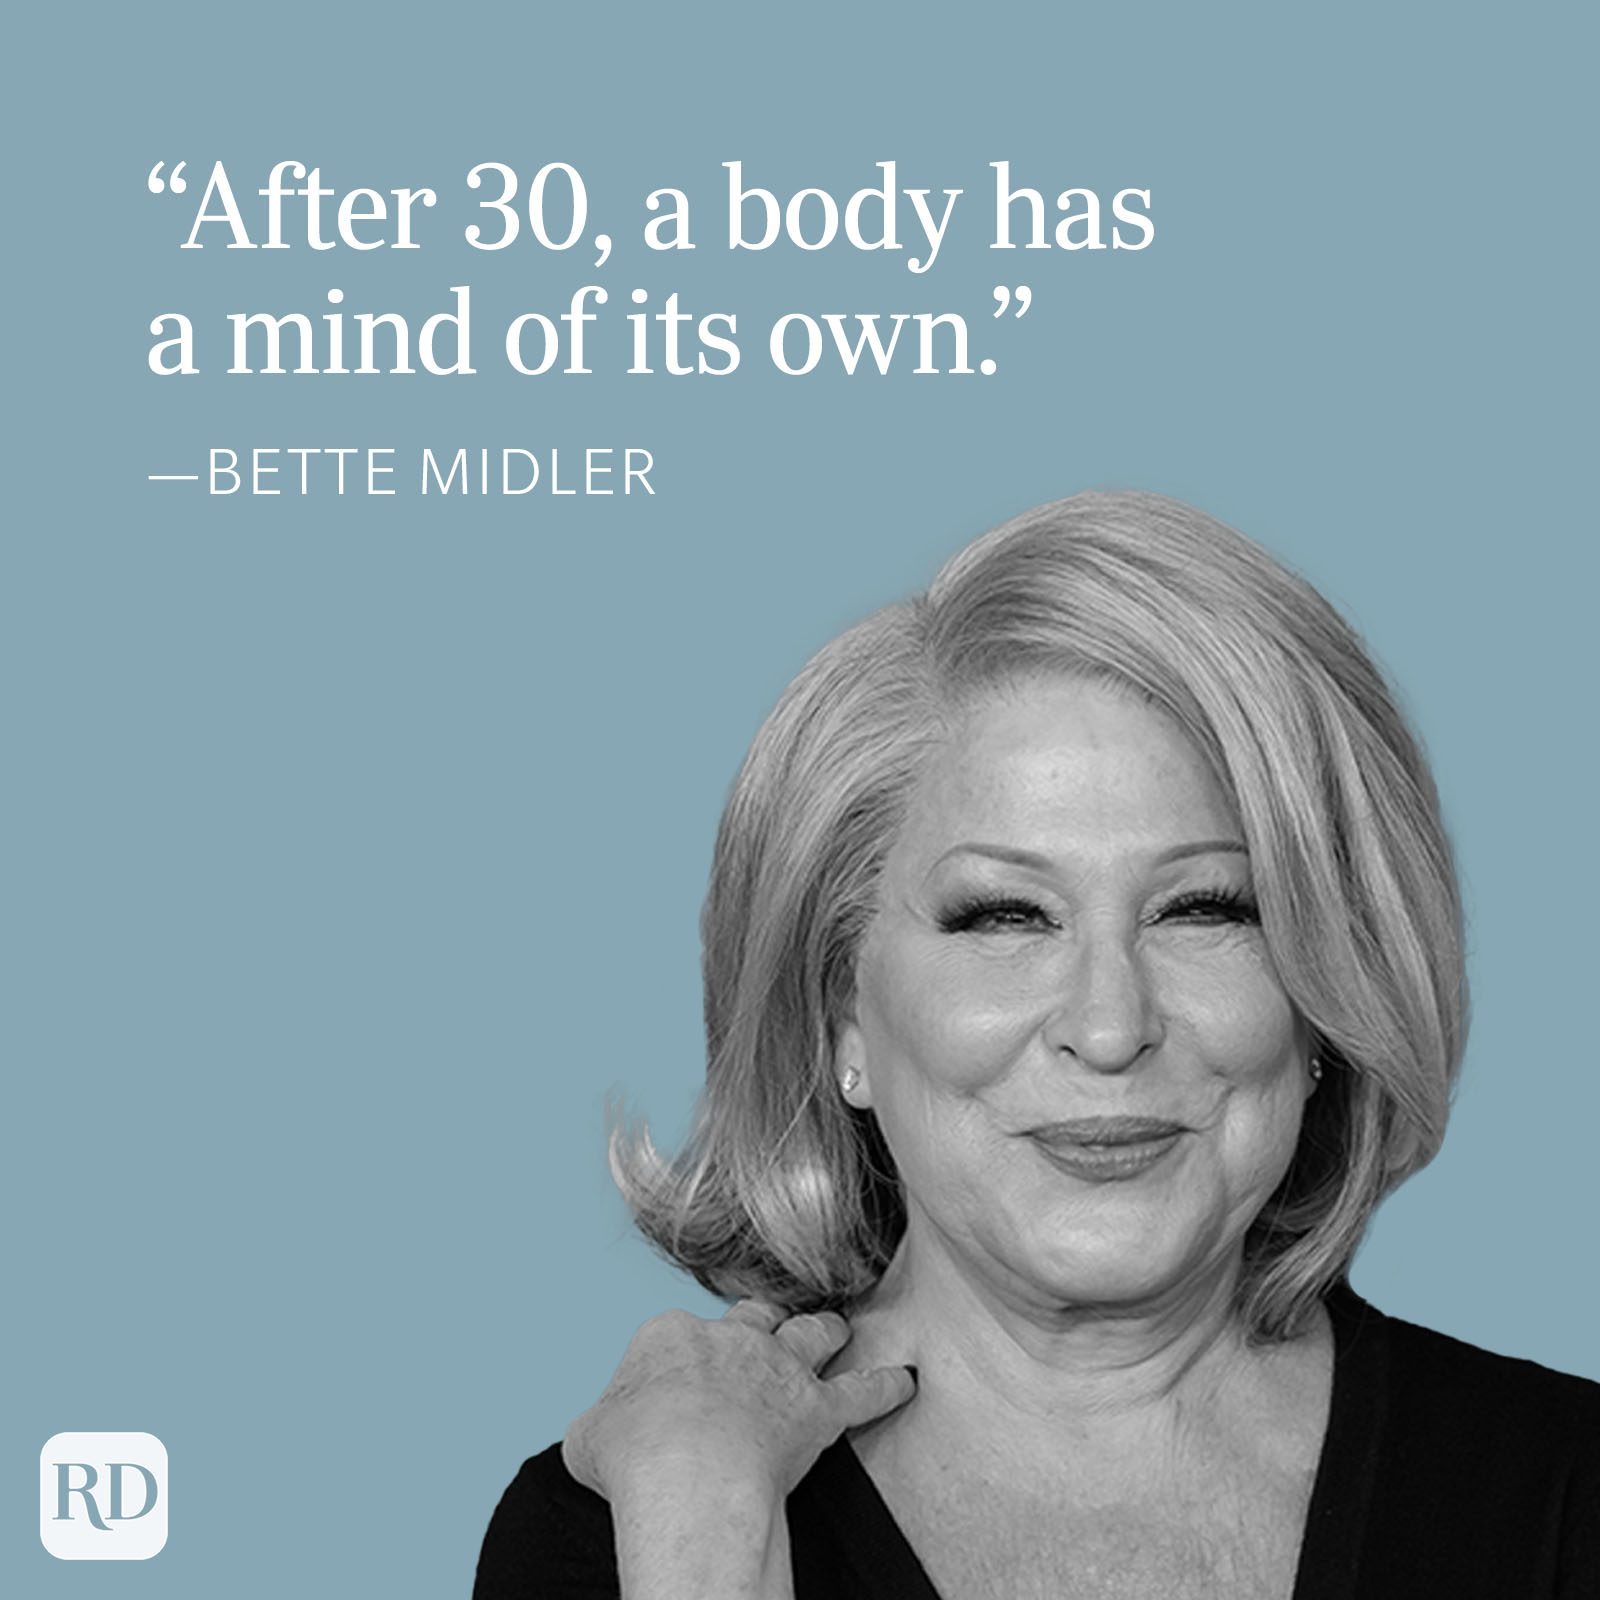 bette midler life quote